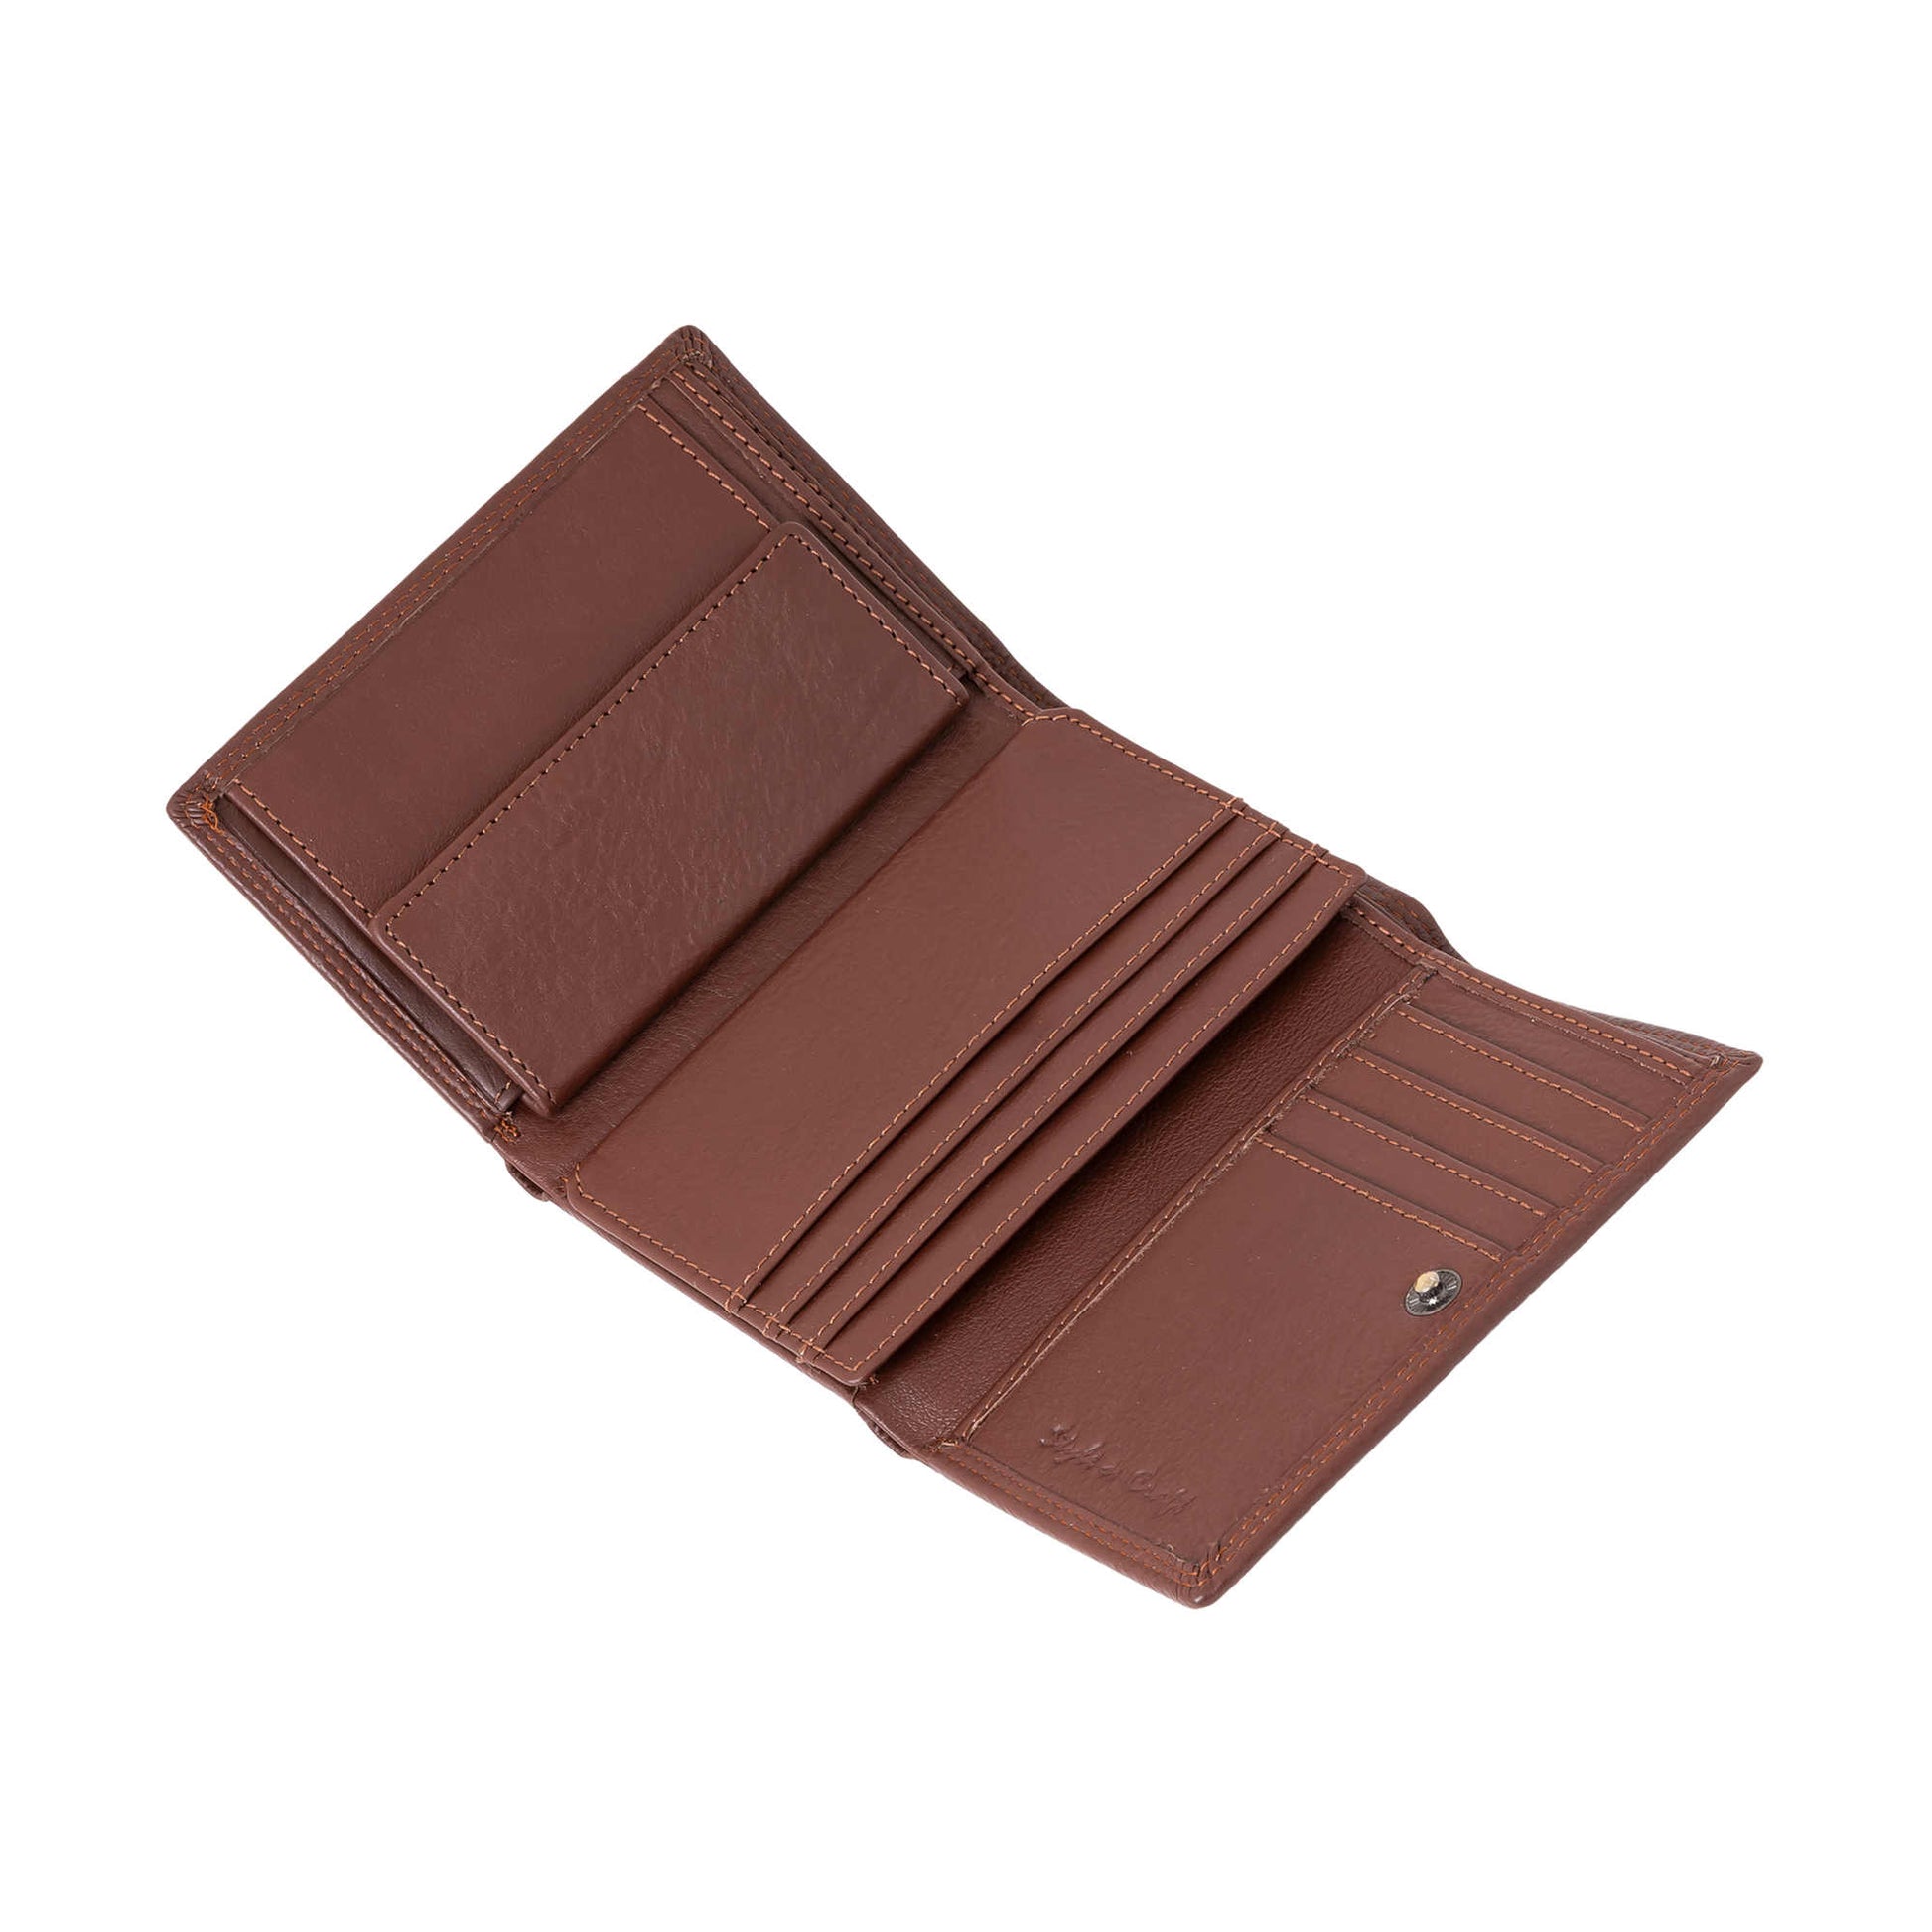 Style n Craft 391109 Ladies Trifold Brown Leather Wallet with Snap Button Closure - Open View 1 - Showing the Credit Card Pockets, Coin Pocket and the Snap Button